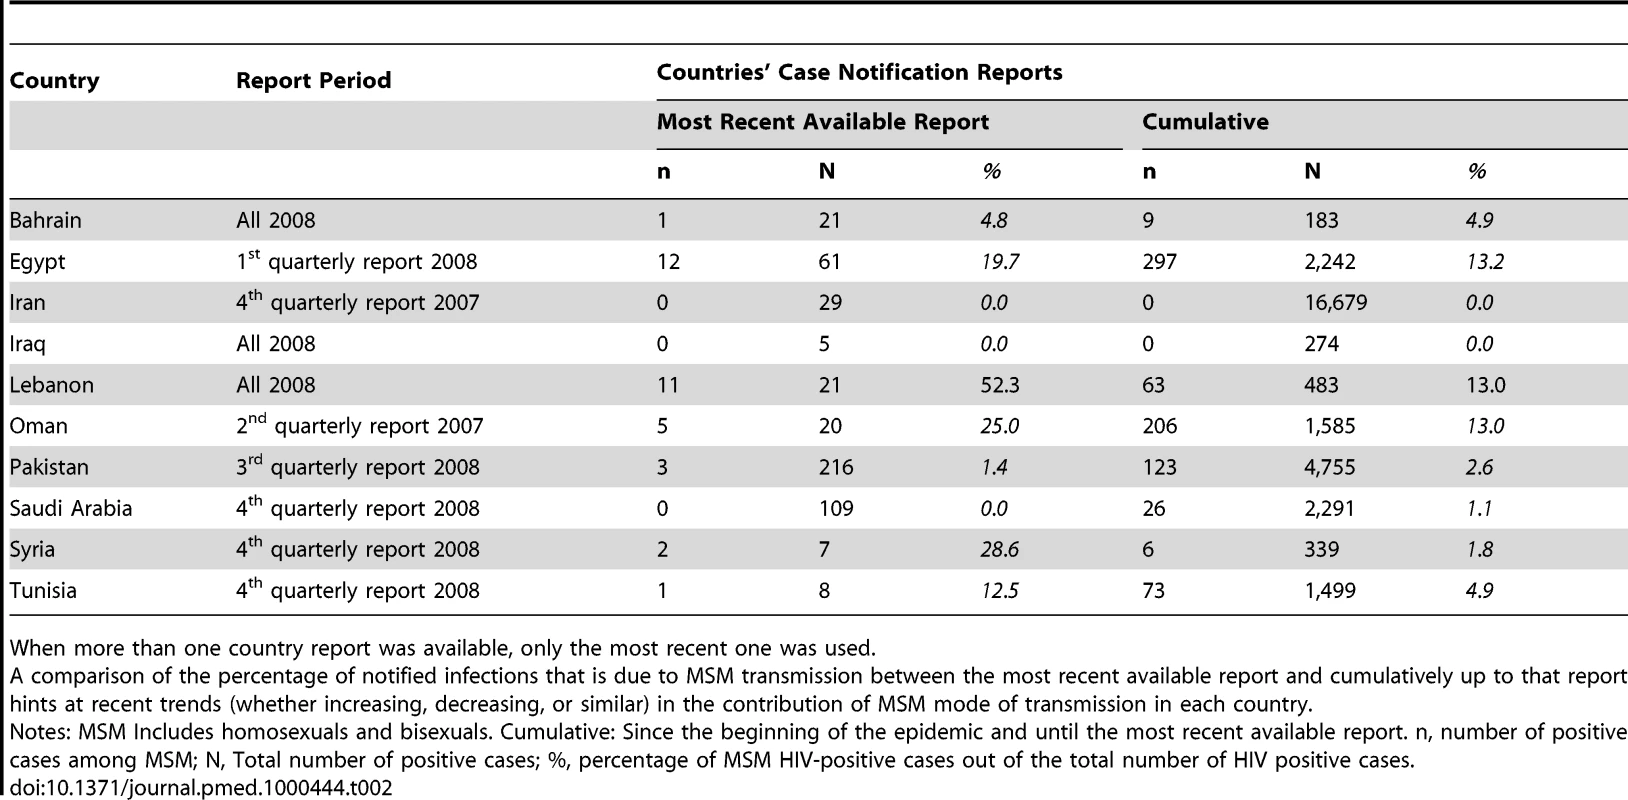 Contribution of MSM mode of transmission to the total diagnosed and notified HIV/AIDS cases by country as per countries' case notification reports.